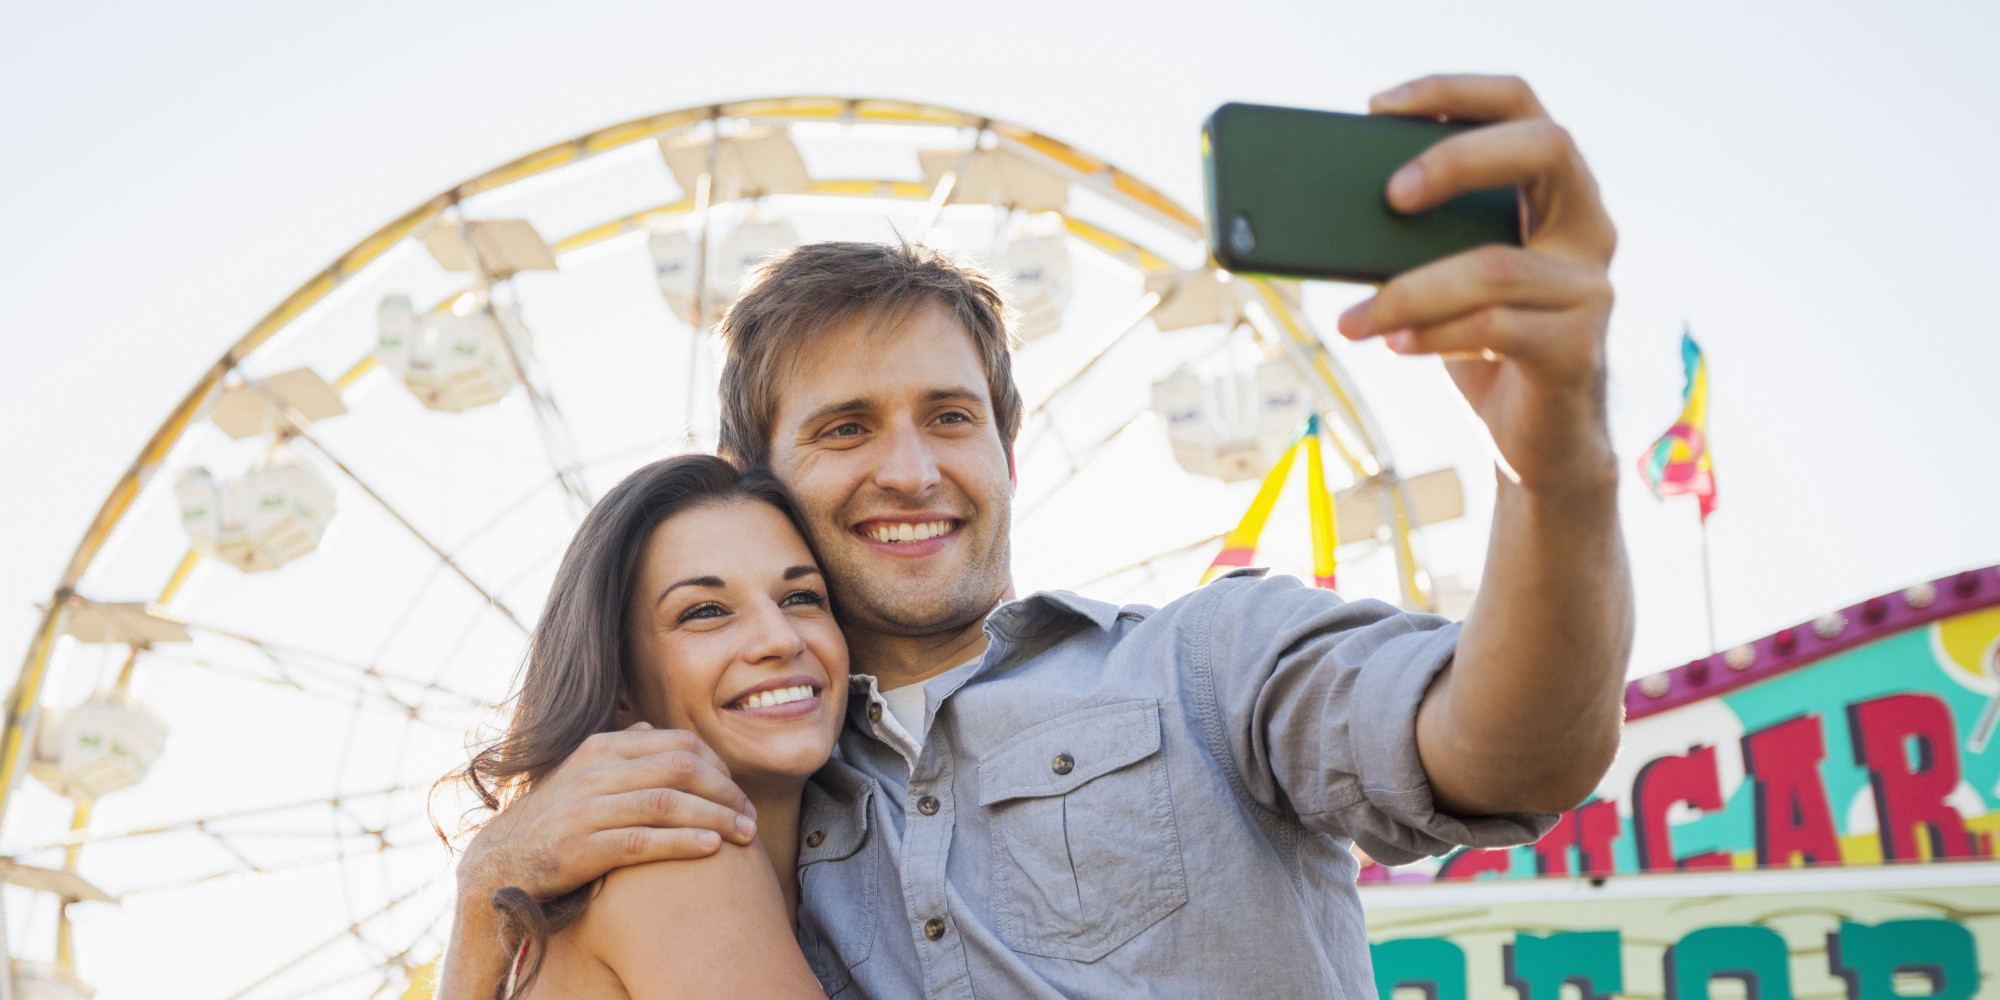 Make Your Selfies Mindful Instead Of Mindless | HuffPost